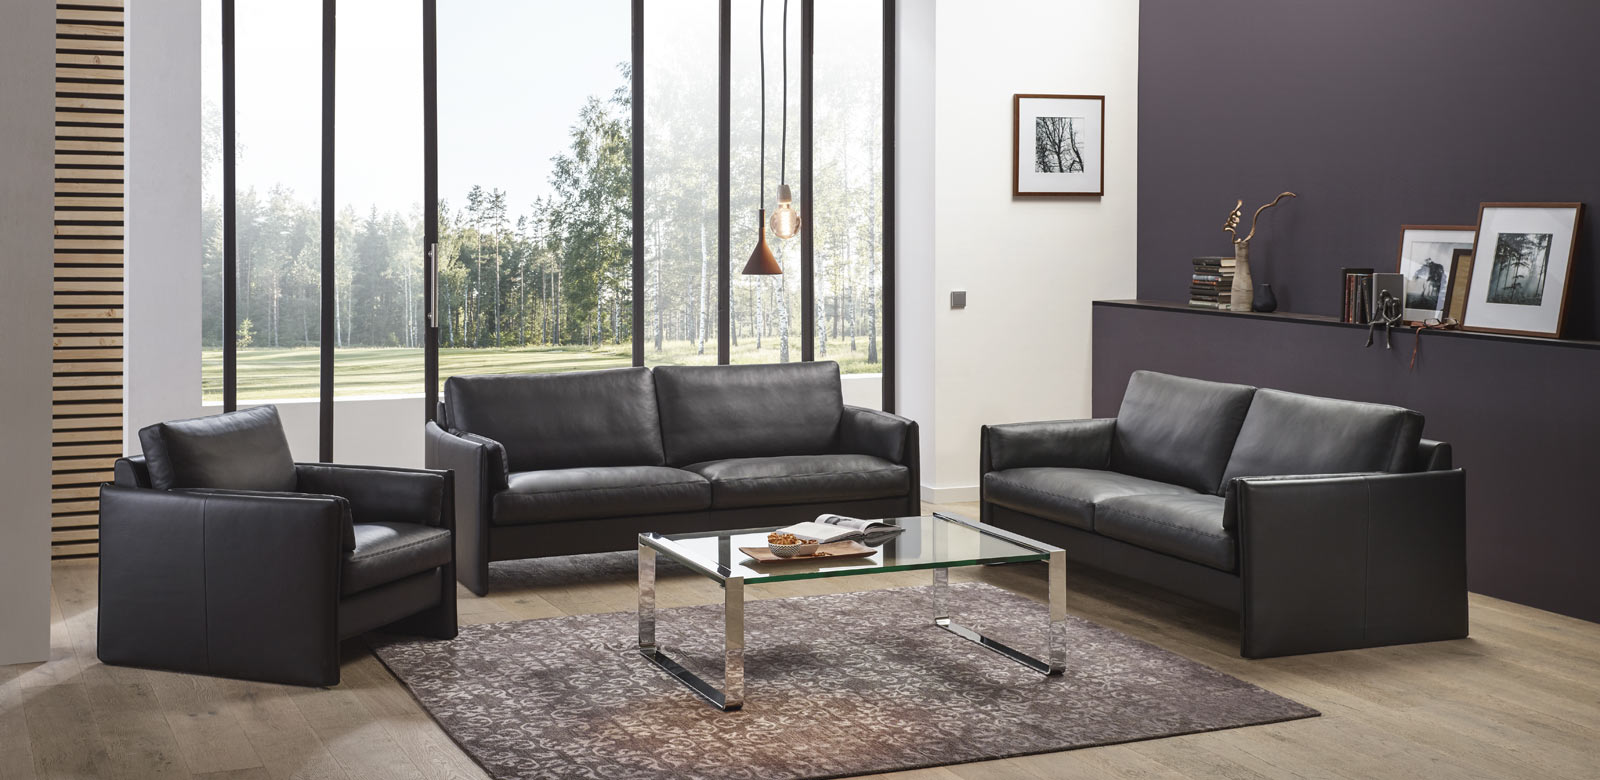 Black CL810 leather couches with matching armchair and glass table in modern living room